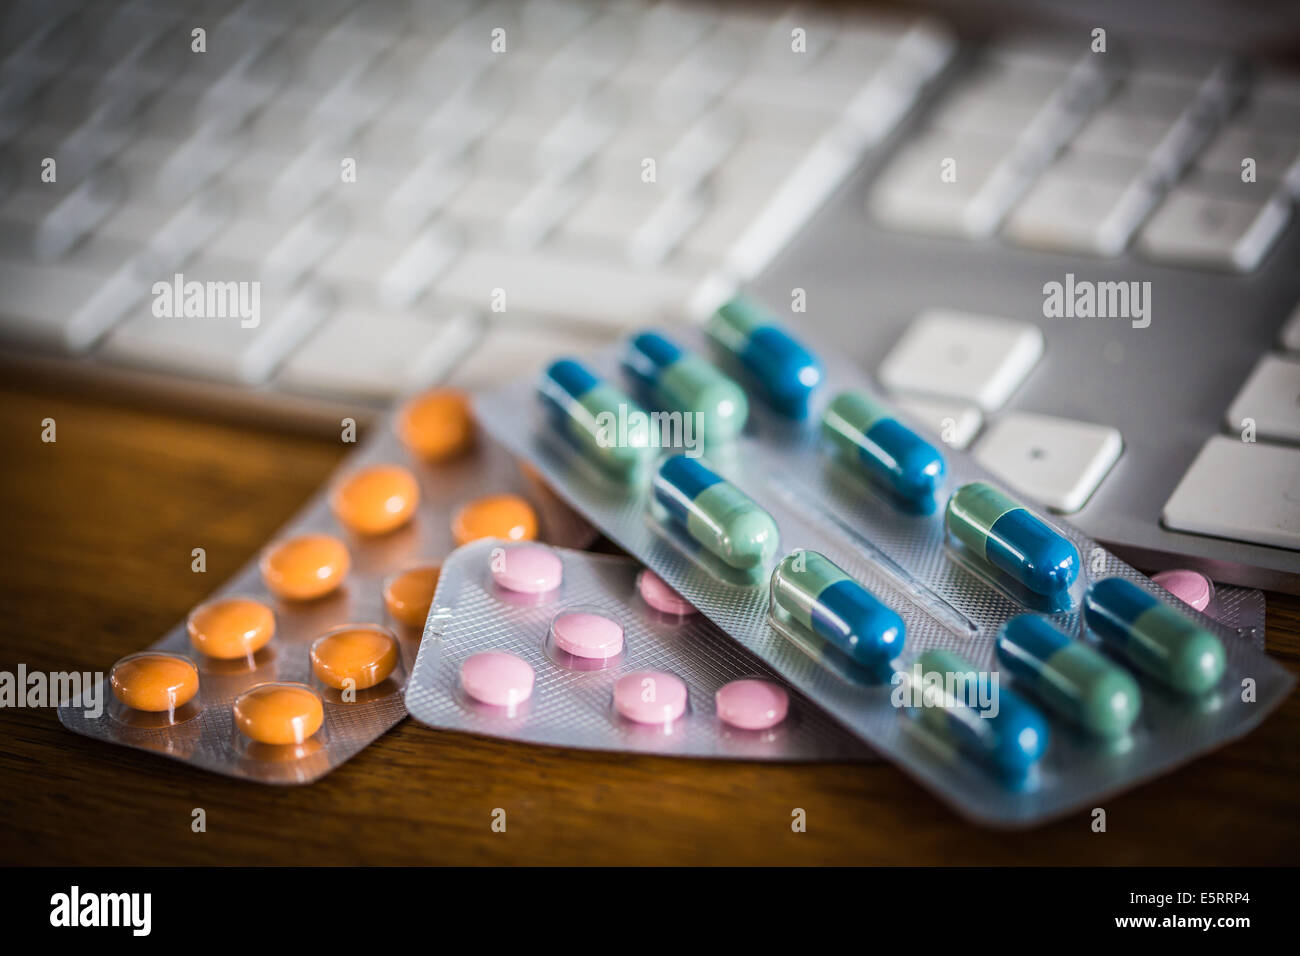 Drugs on a computer keyboard to illustrate buying medicines online. Stock Photo